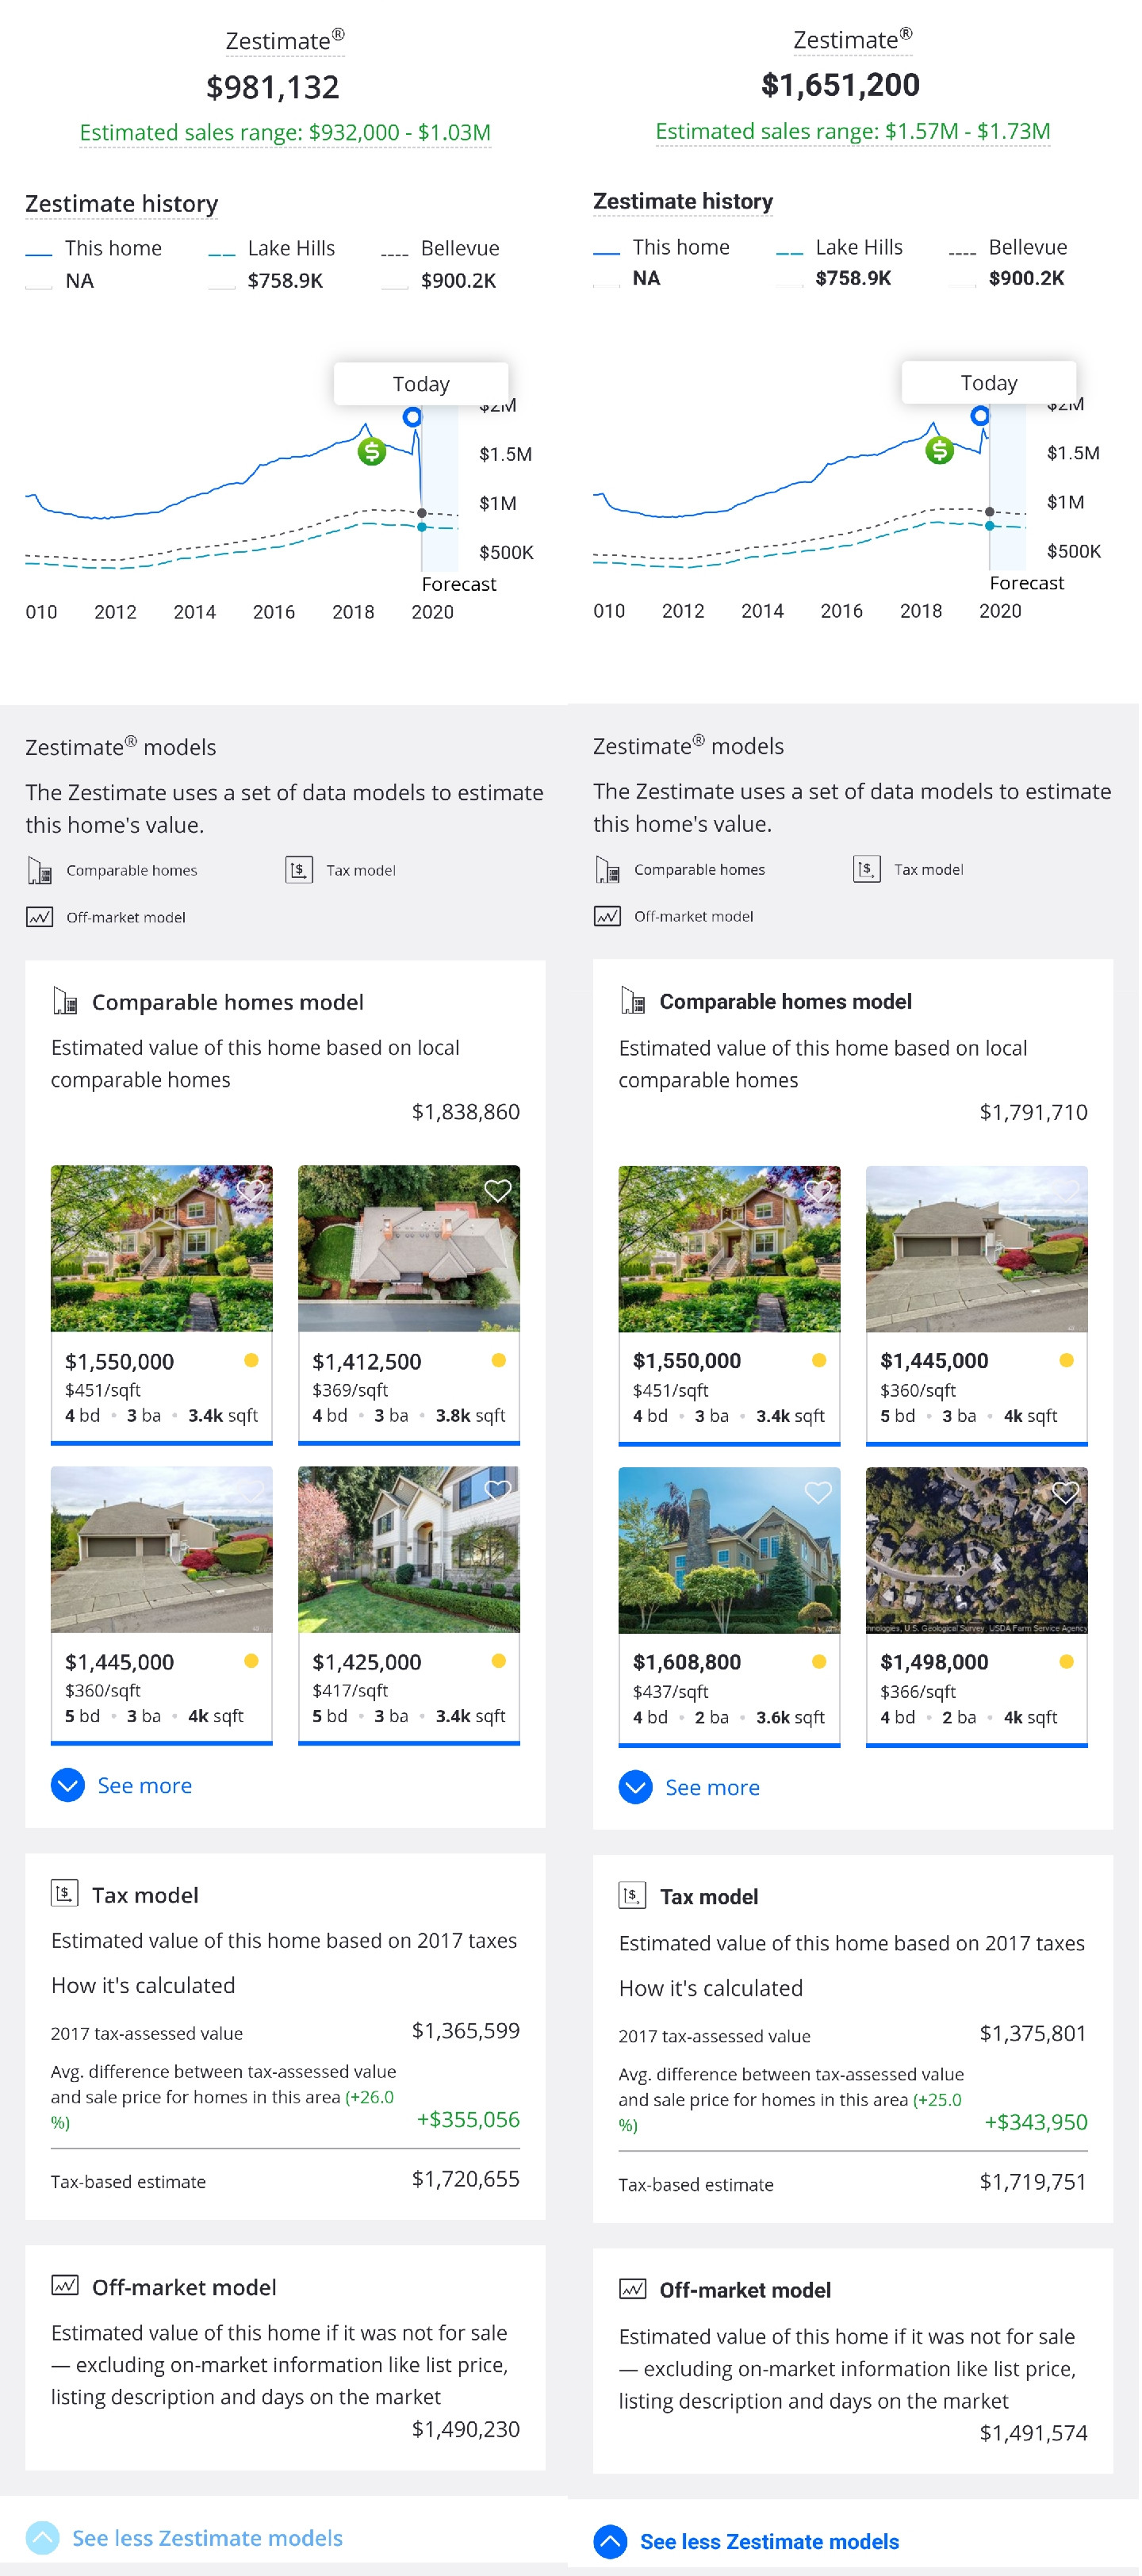 Zillow Zestimate at $981,132 on 09/27/2019 (left) vs. $1,651,200 on 09/28/2019 (right)